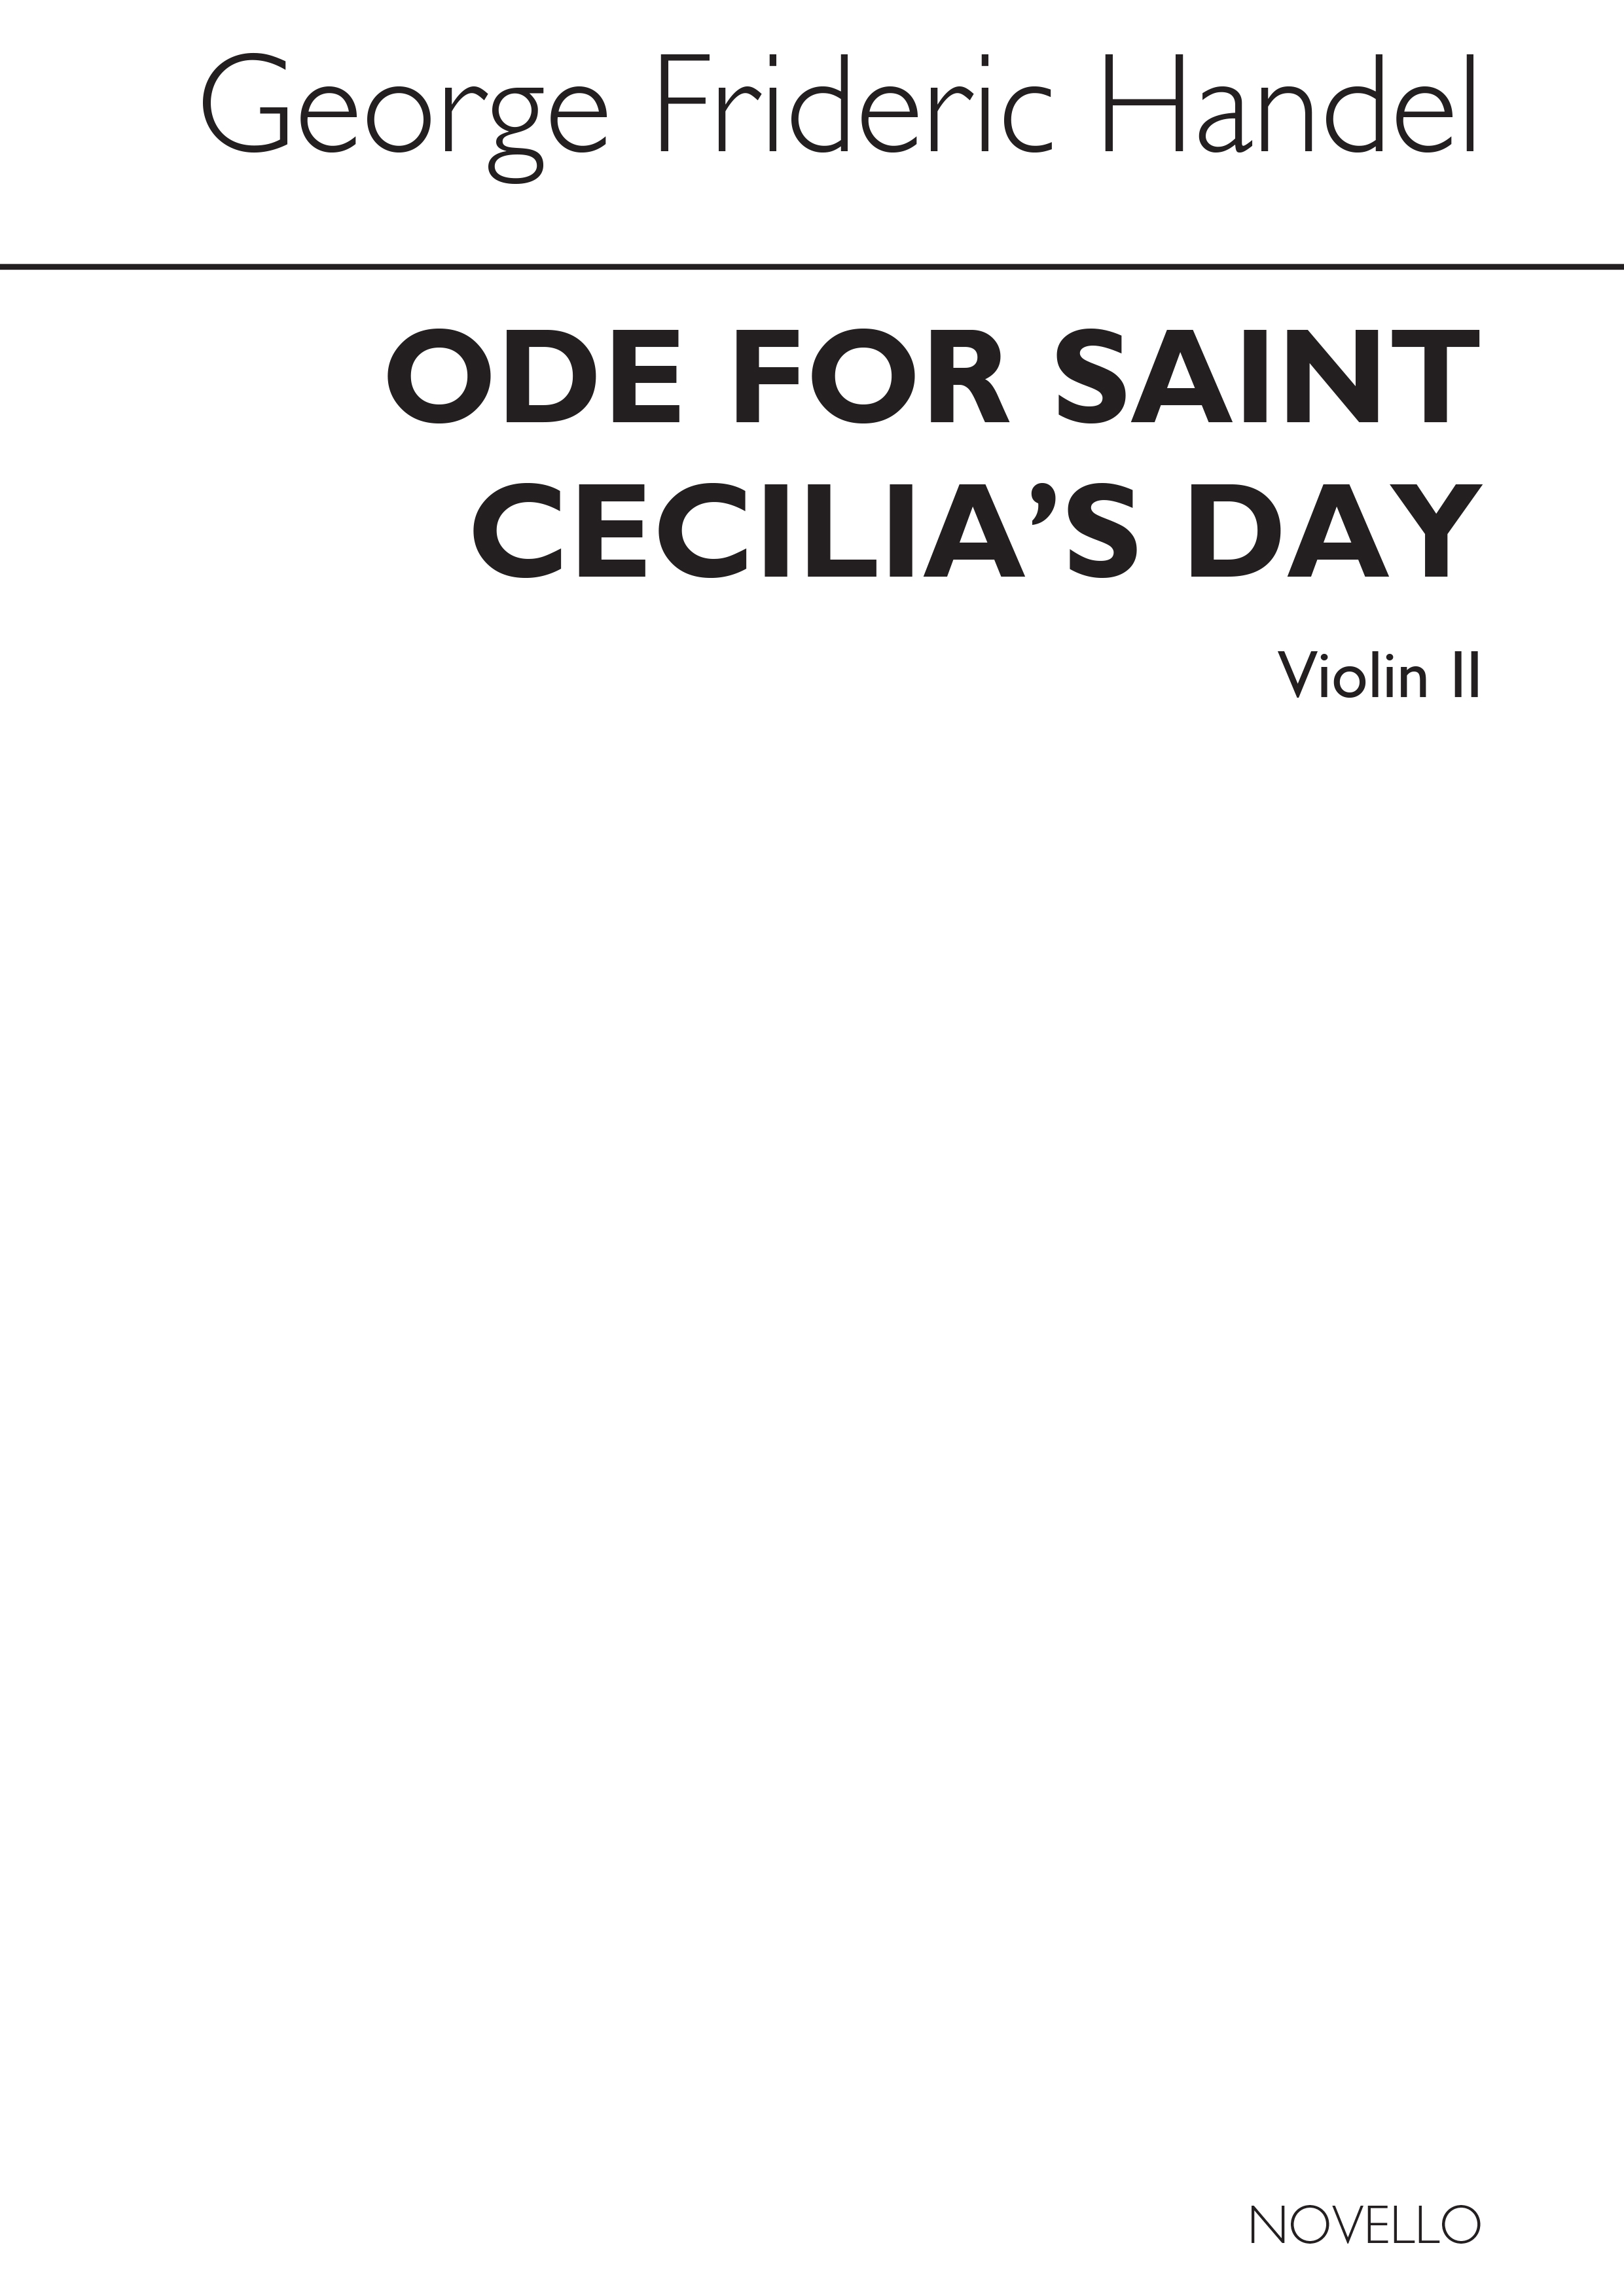 Georg Friedrich Hndel: Ode For Saint Cecilia's Day: Violin: Part